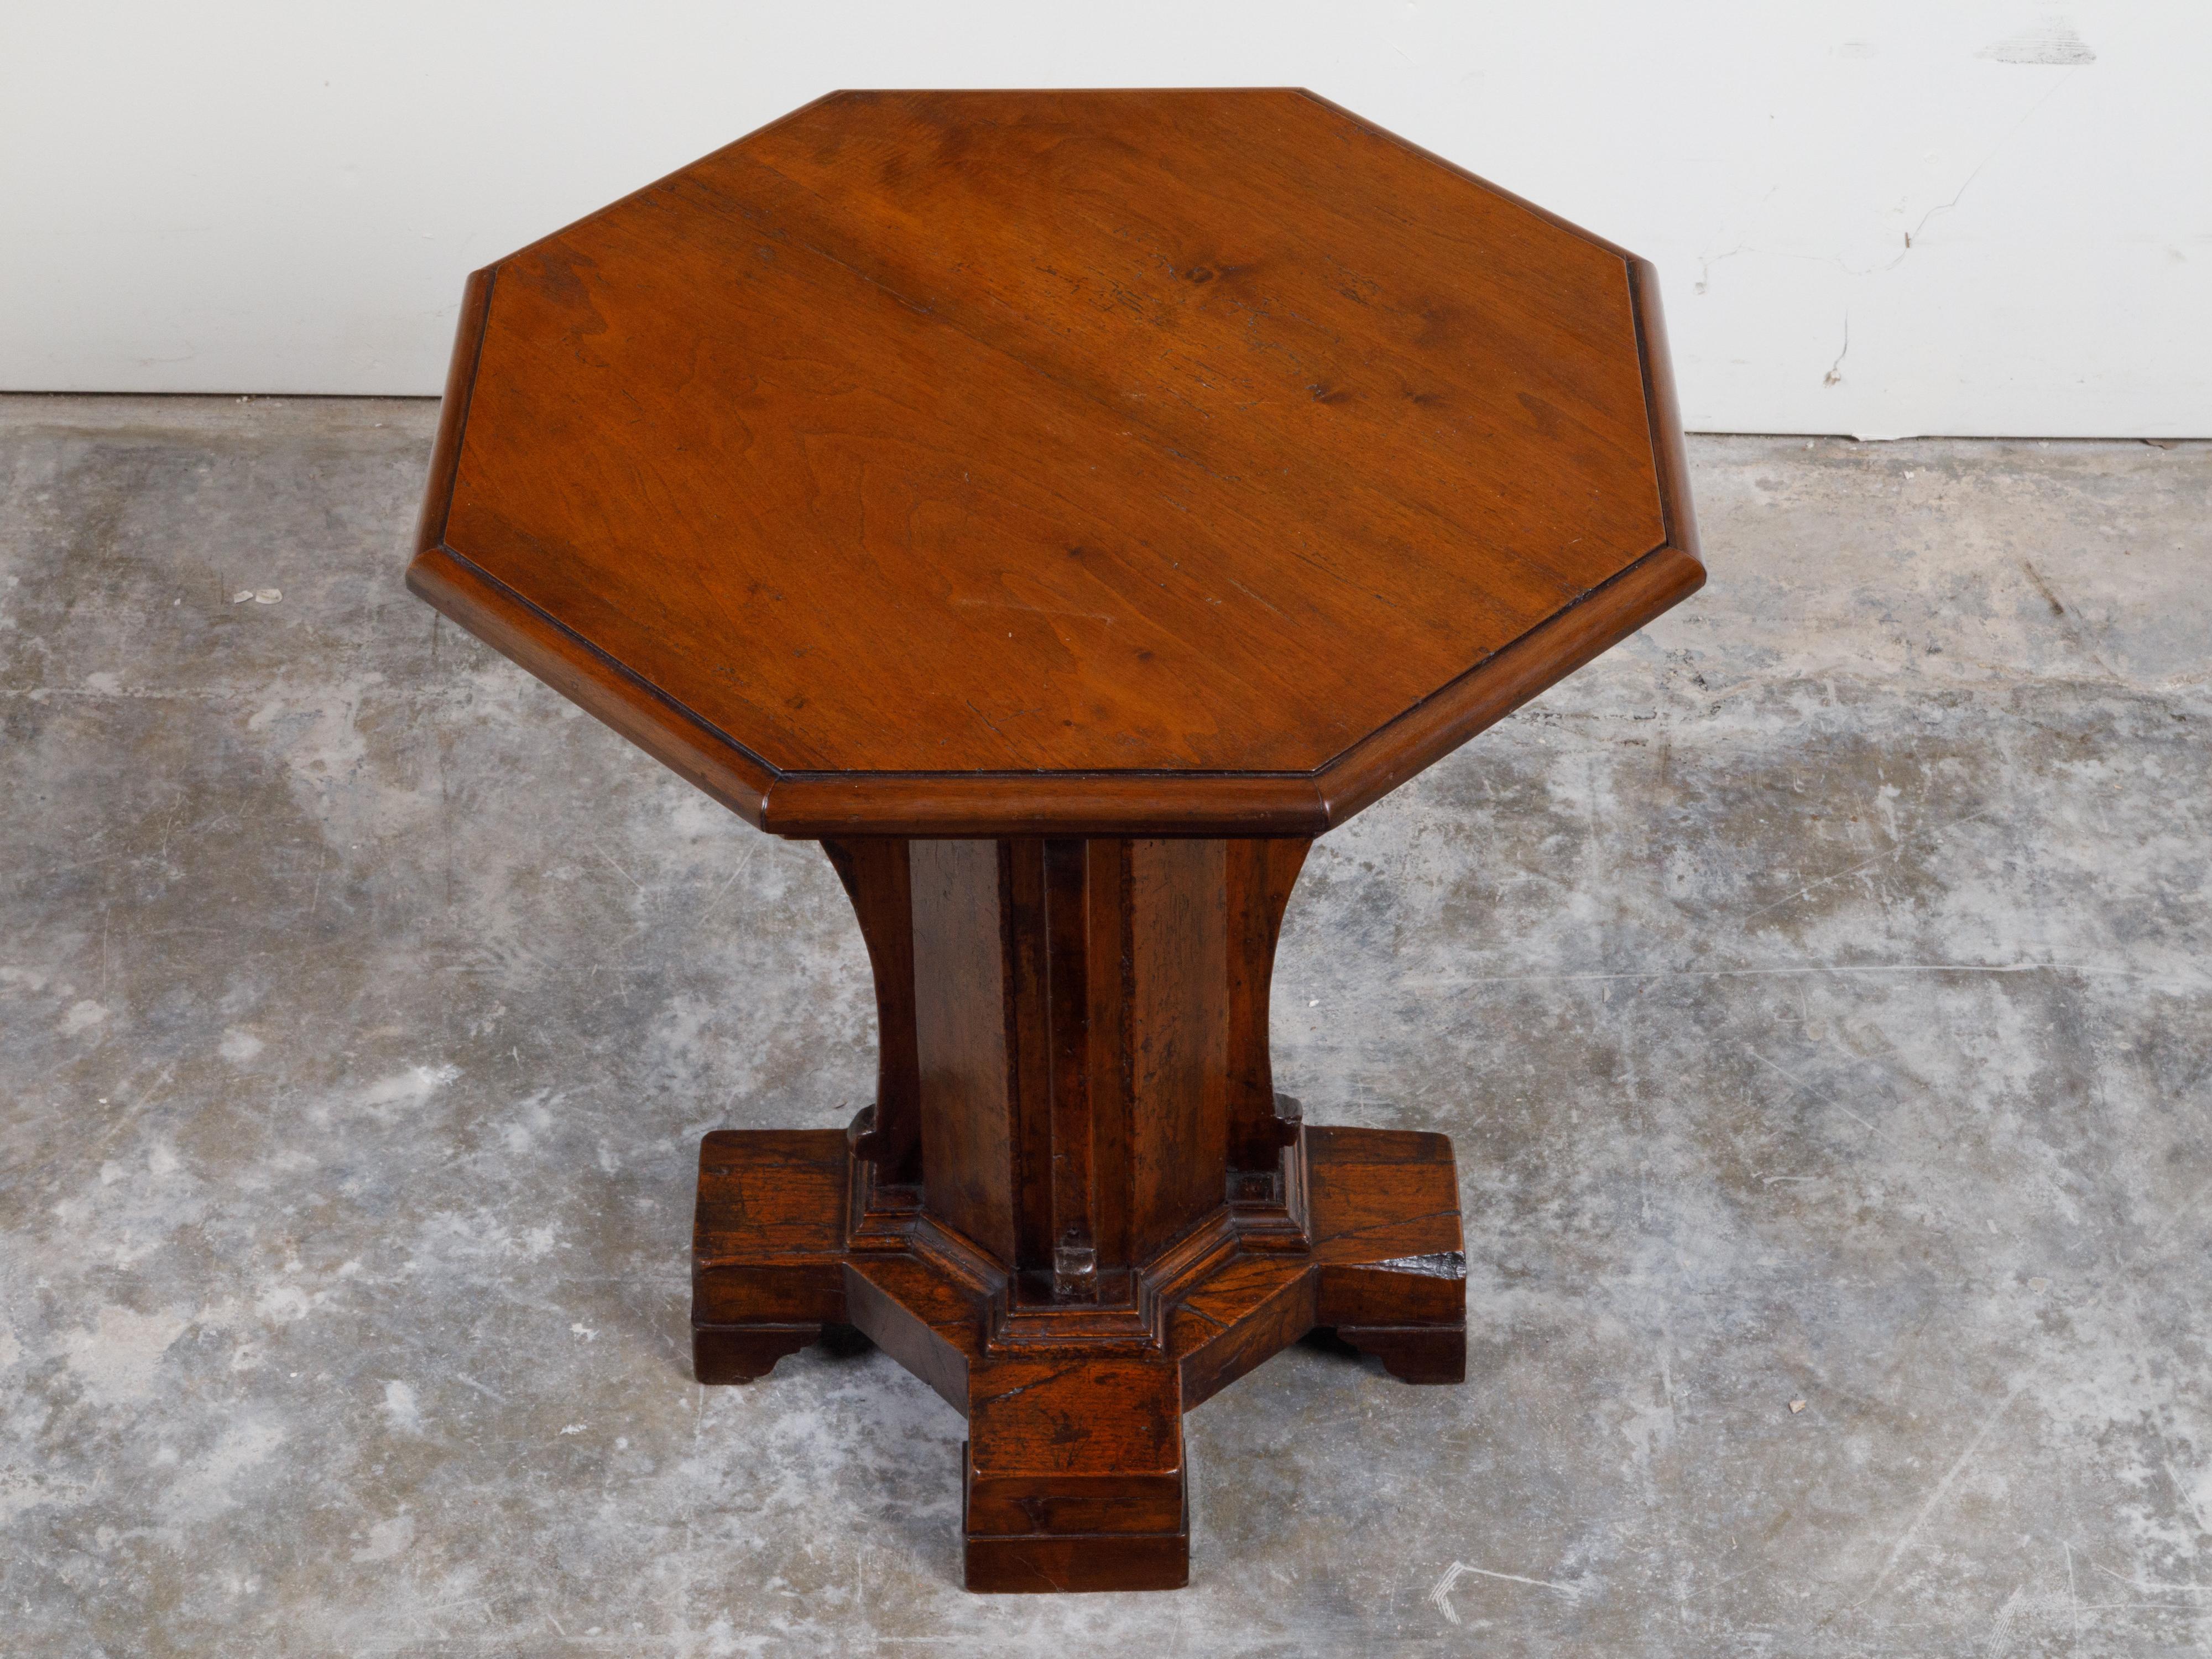 Italian 19th Century Walnut Side Table with Octagonal Top and Pedestal Base For Sale 5